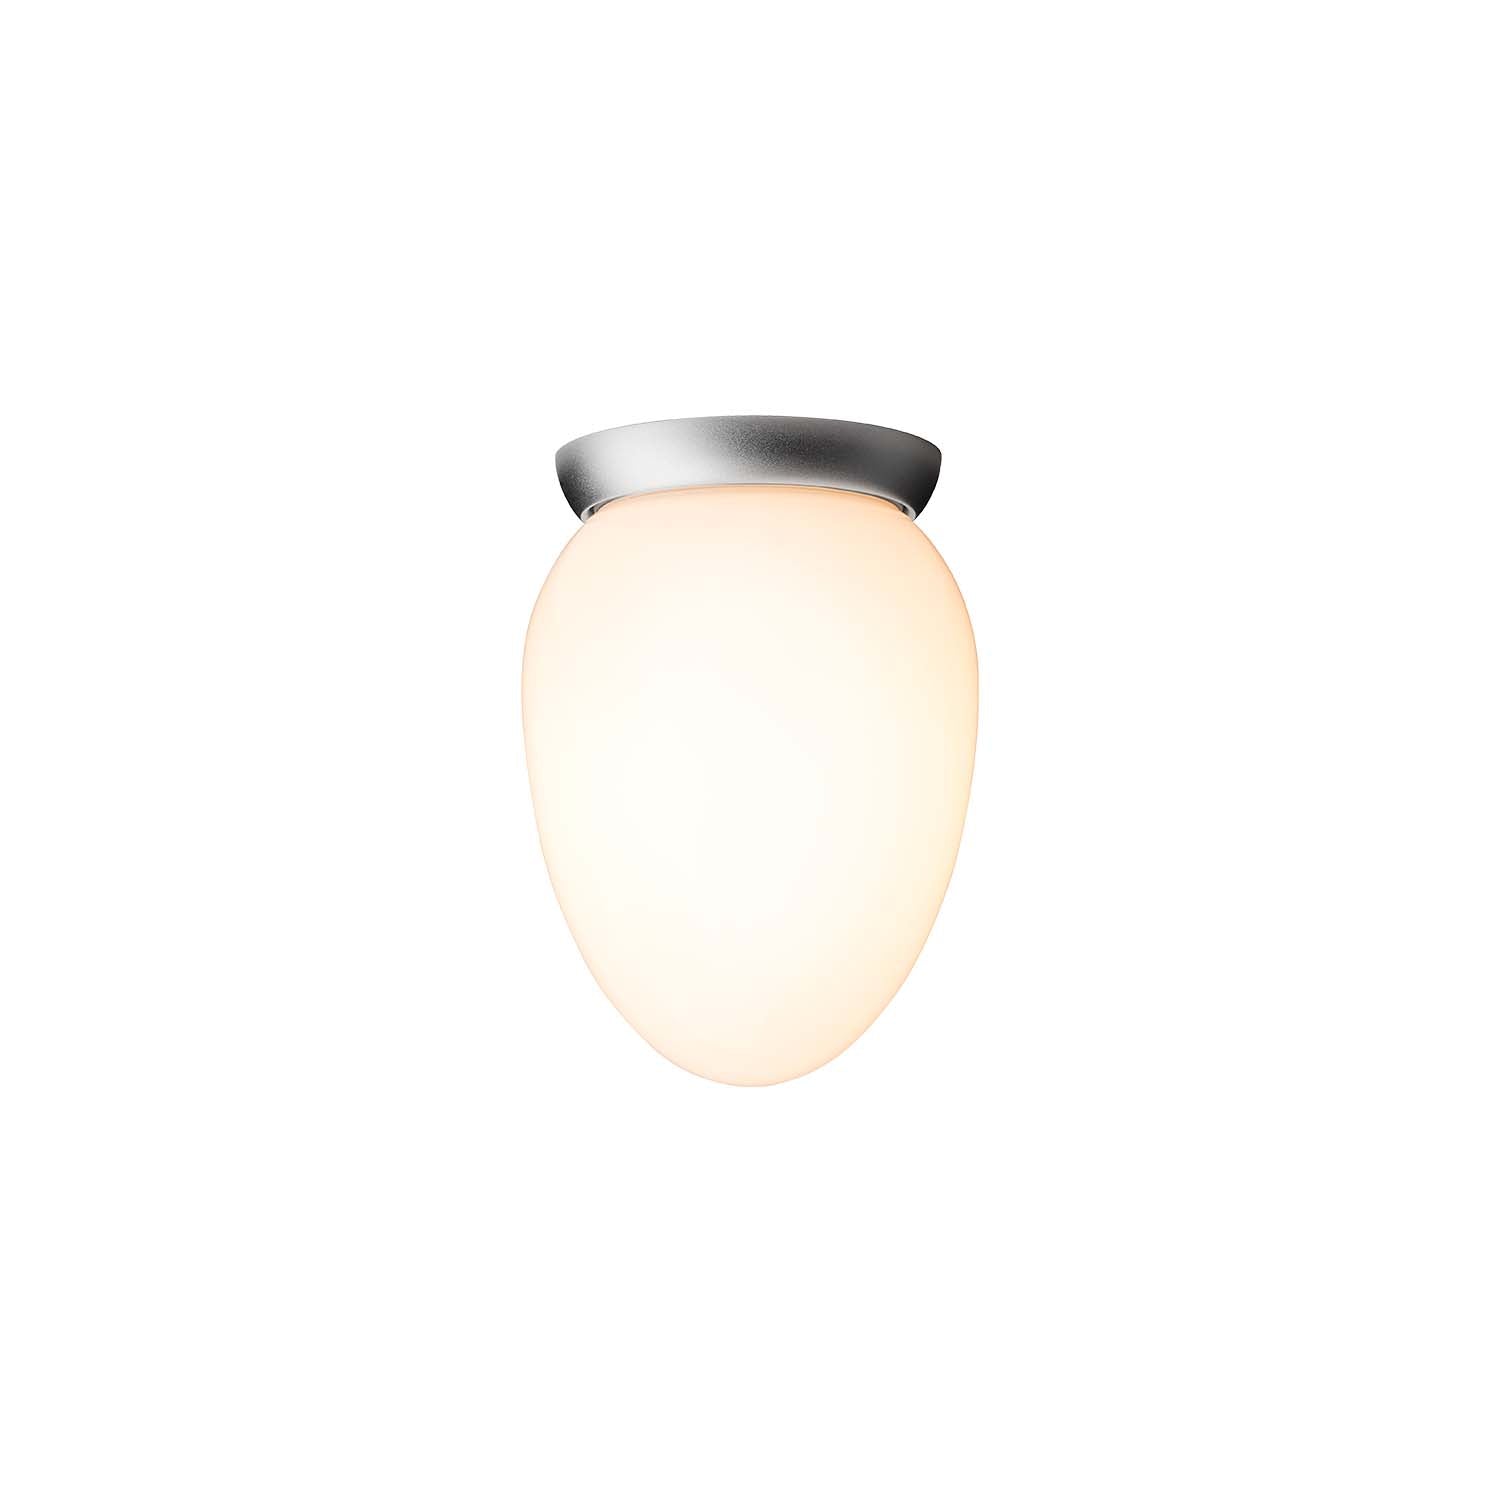 RIZZATTO 171 - Egg white glass ceiling light, design and cocooning